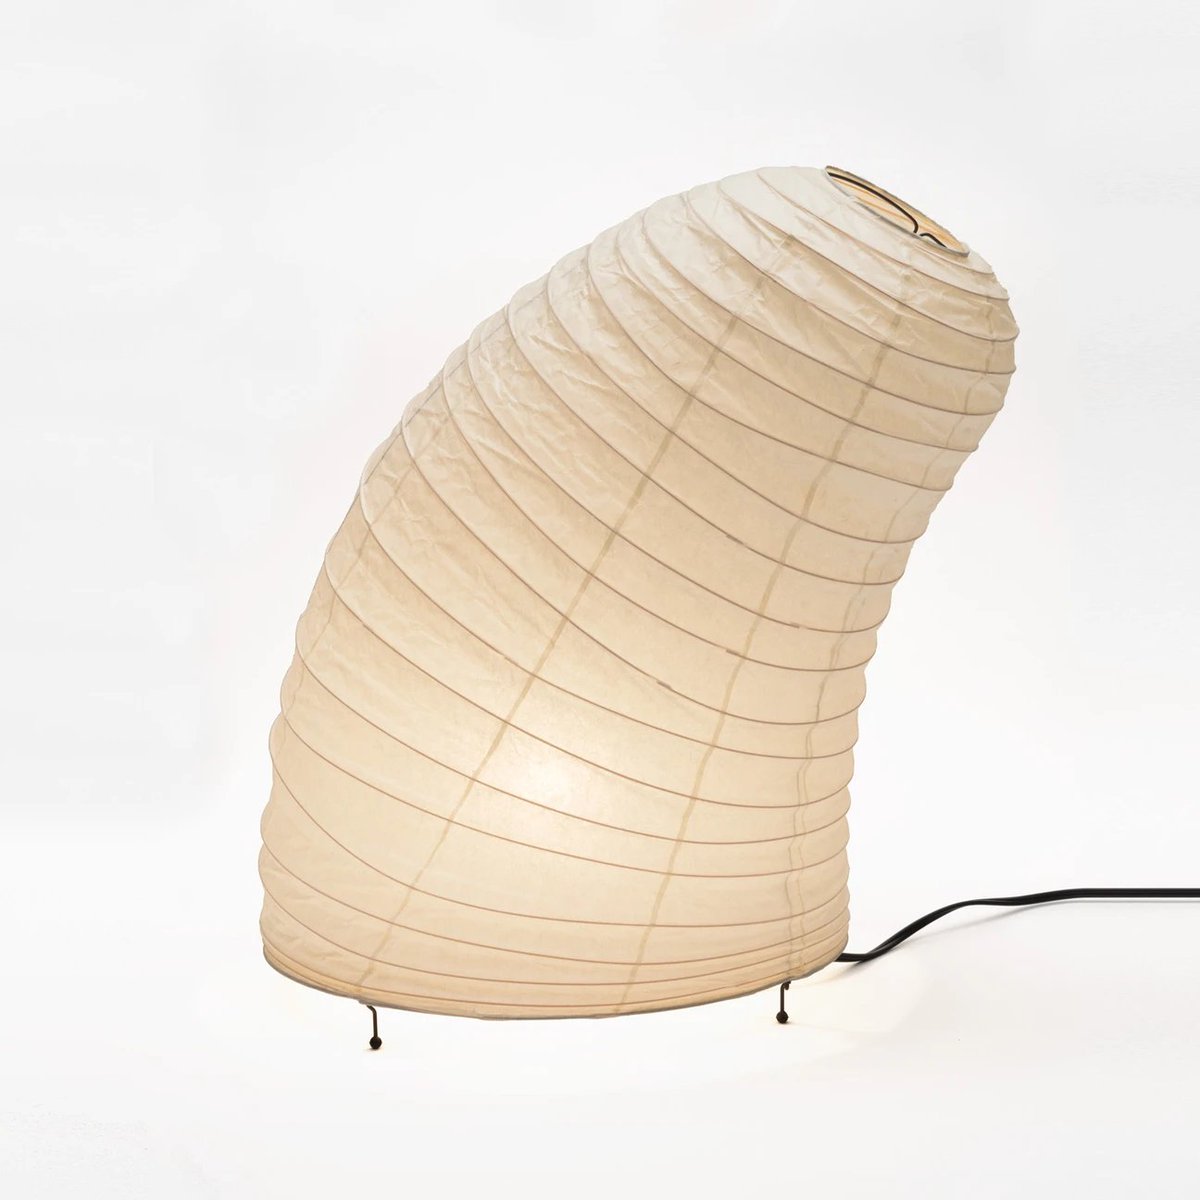 Don't know how many of you know the 20th-century Japanese-American designer Isamu Noguchi, but among many other wonderful accomplishments he made some amazing, functional light sculptures. Neat making-of video here:  https://shop.noguchi.org/collections/akari-light-sculptures